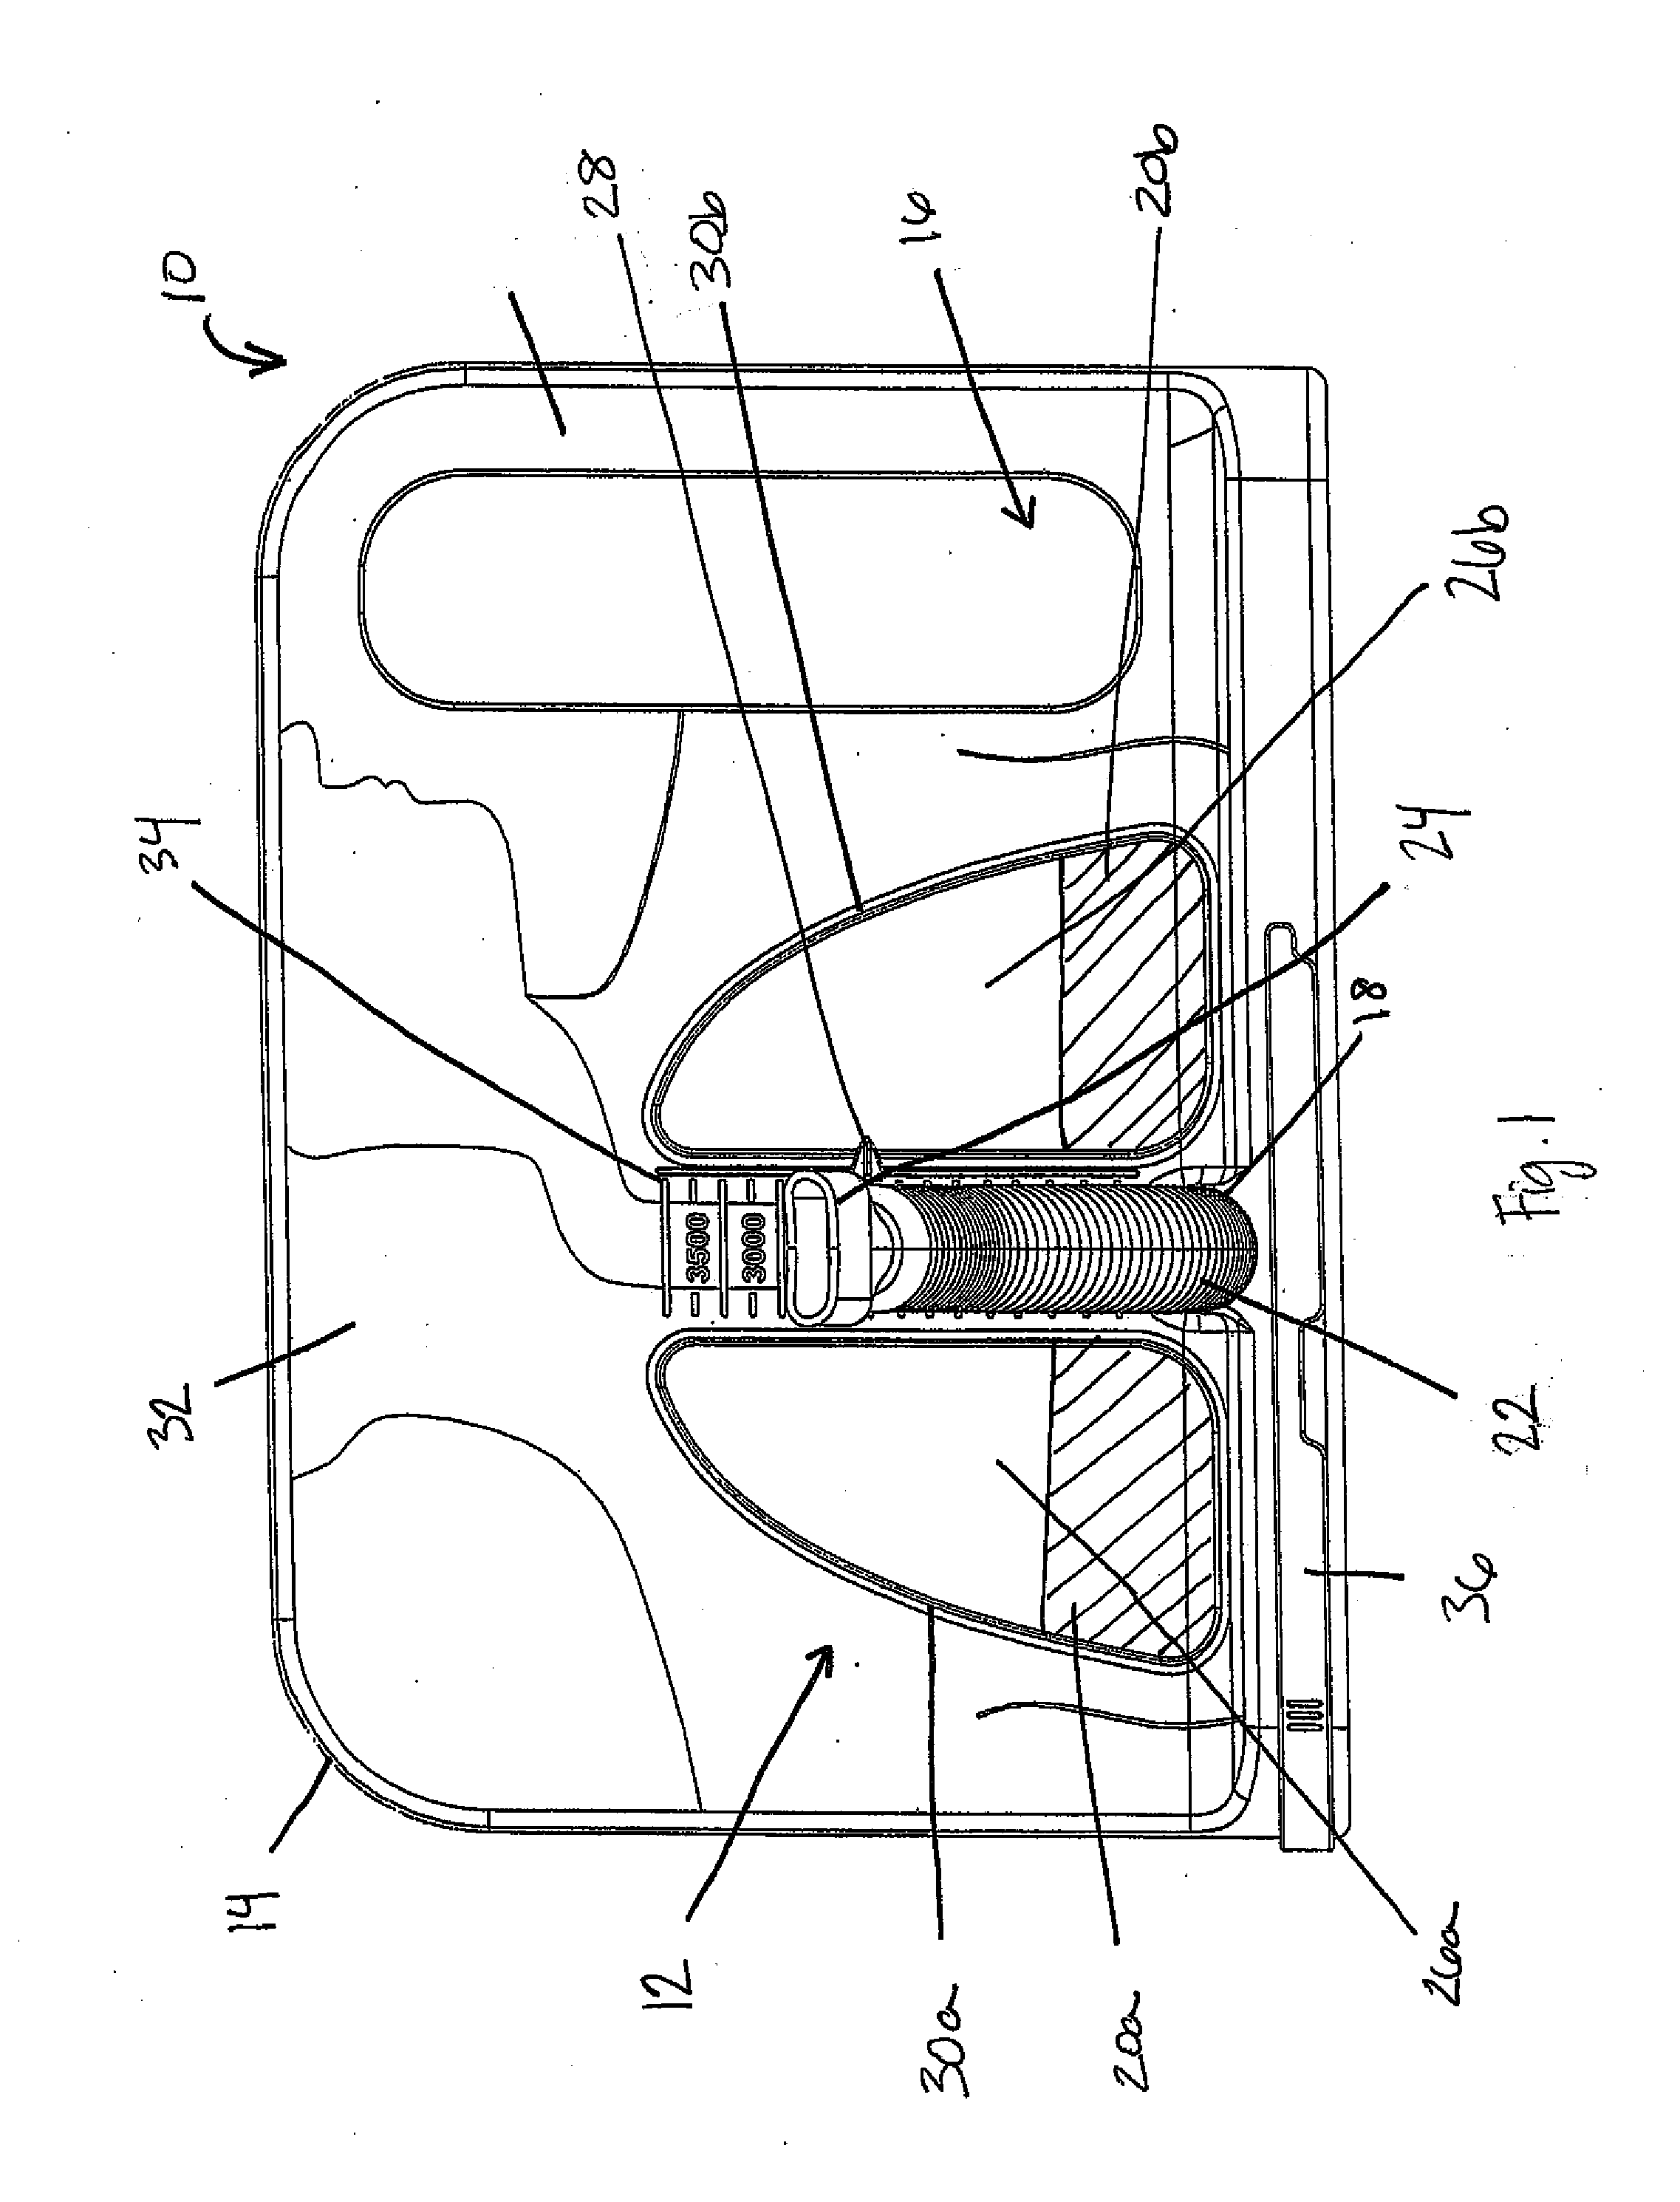 Spirometer device with visual aid for therapeutic breathing